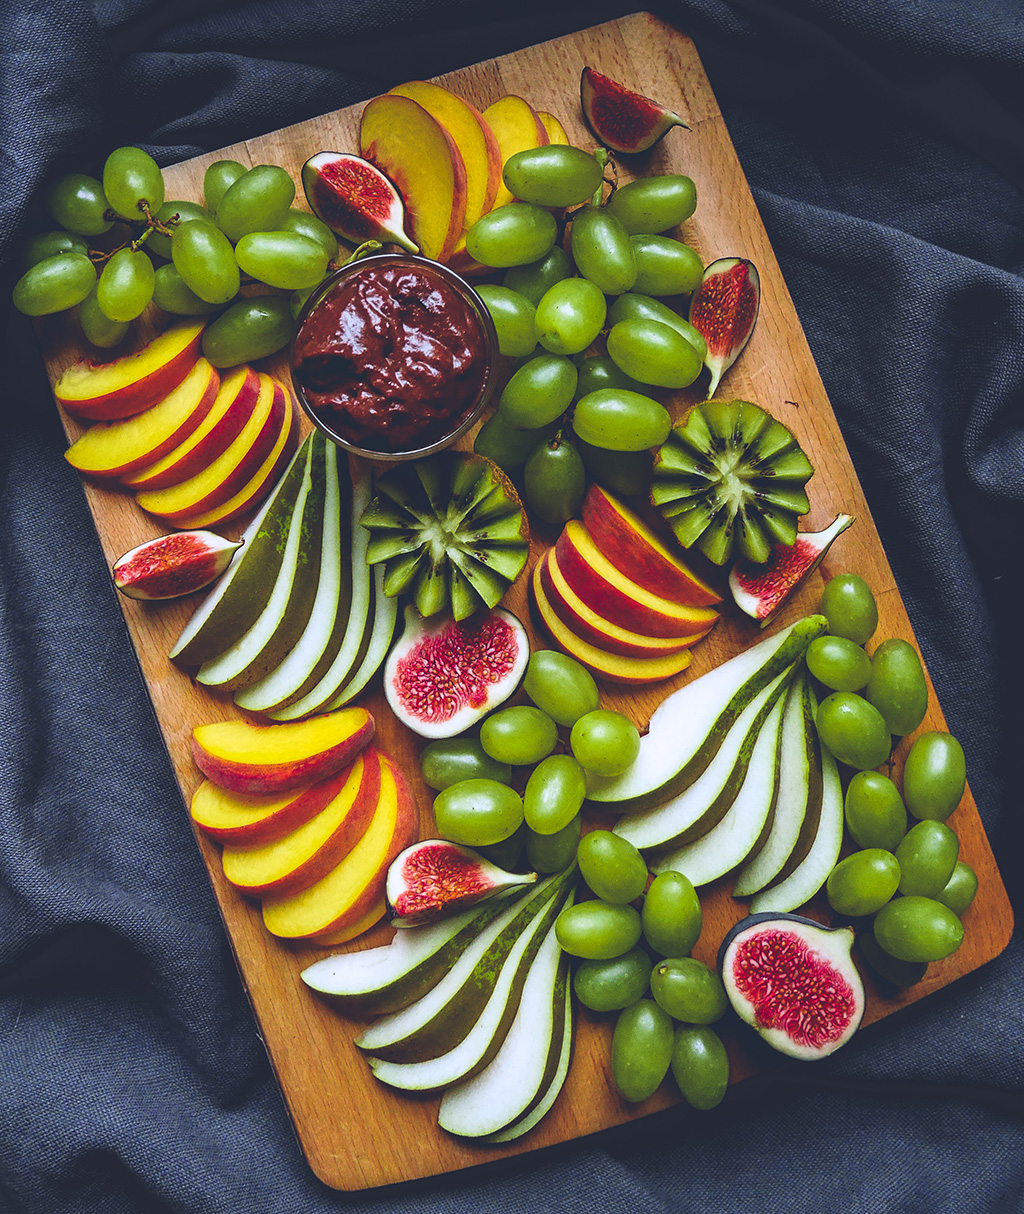 Nectarine & Pear Fruit Platter with Chocolate Dip